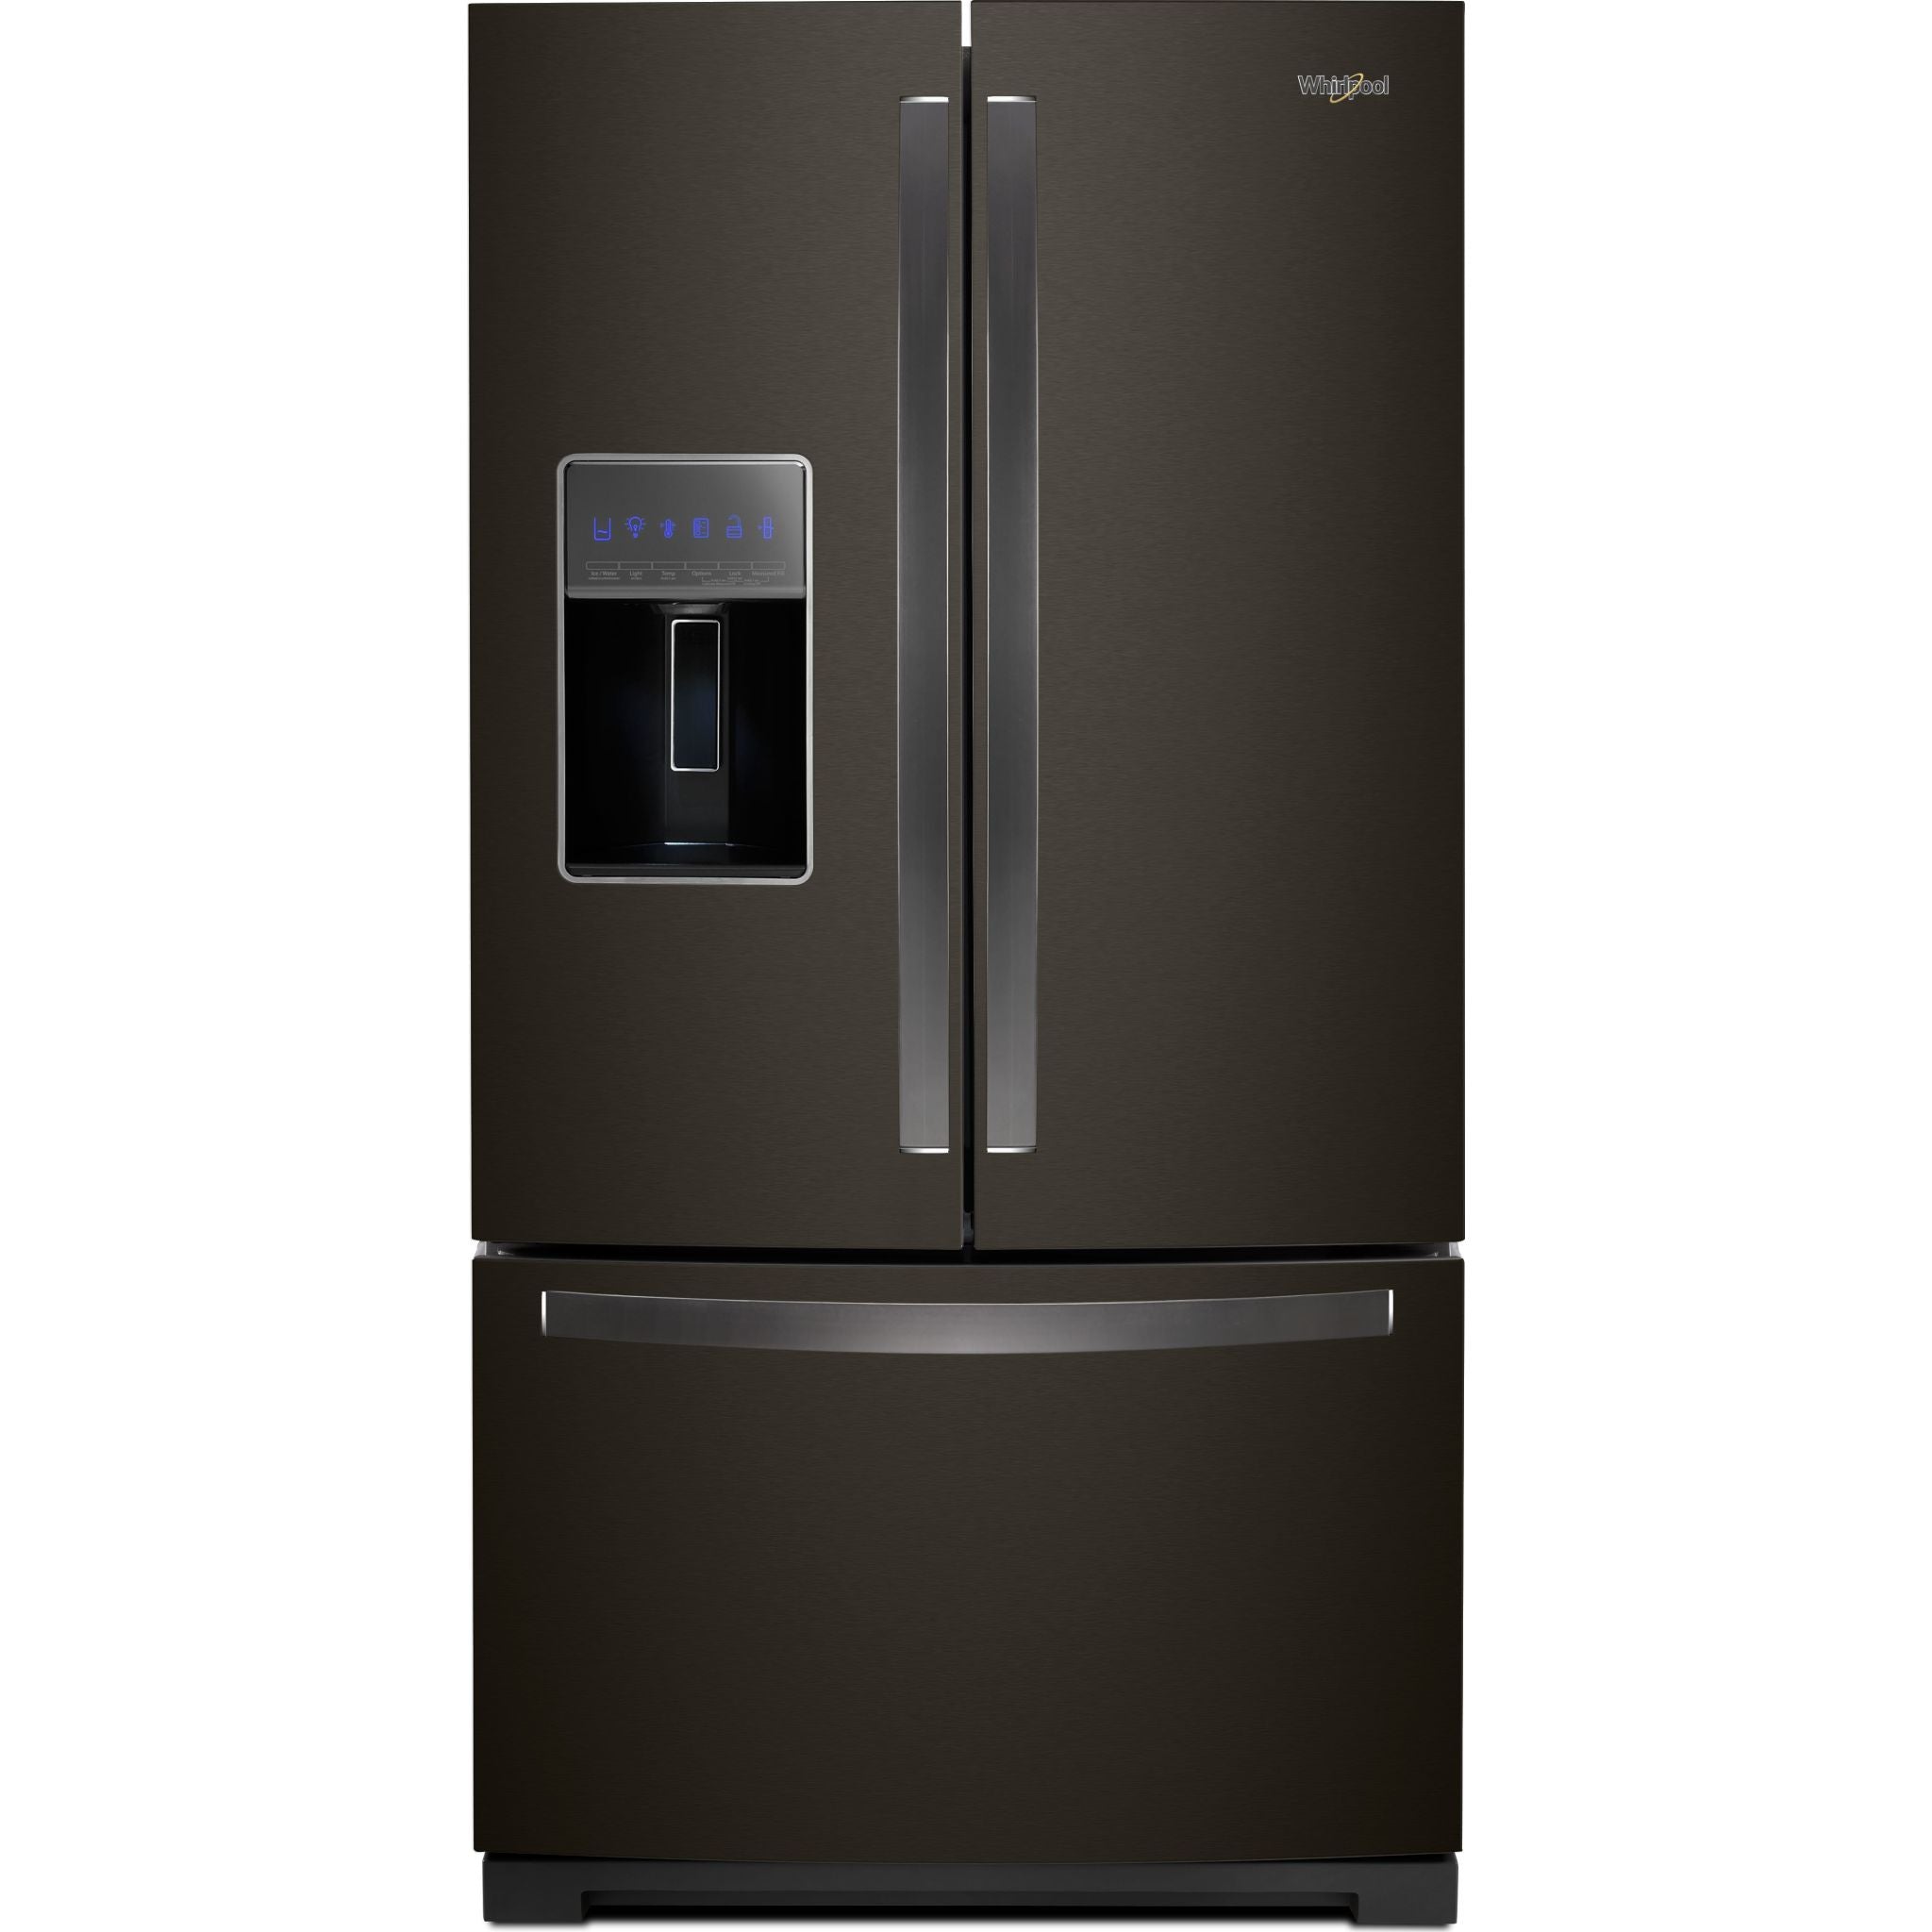 Whirlpool French Door Fridge (Wrf767sdhv) In Black Stainless, Size: 34"-38" W